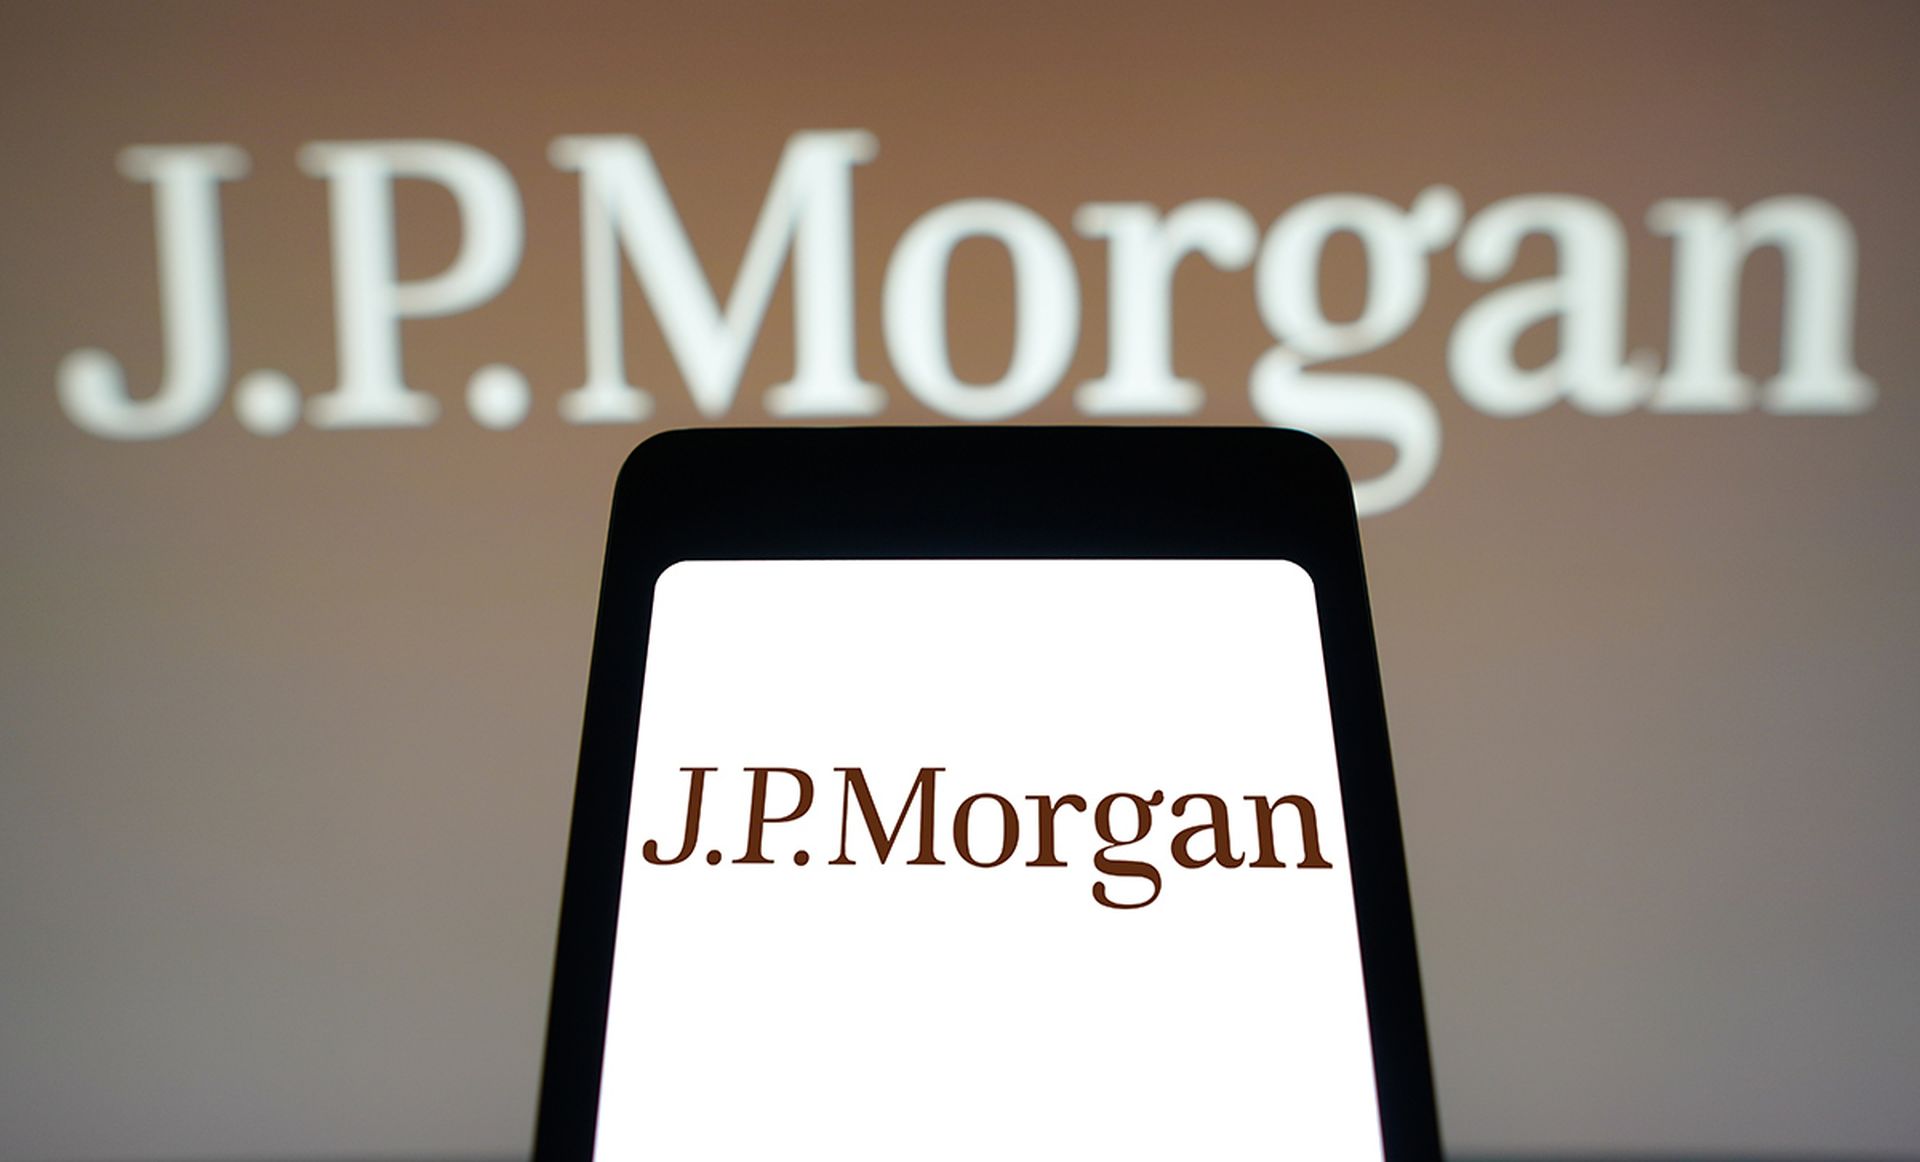 The JPMorgan logo is displayed on a smartphone screen and in the background